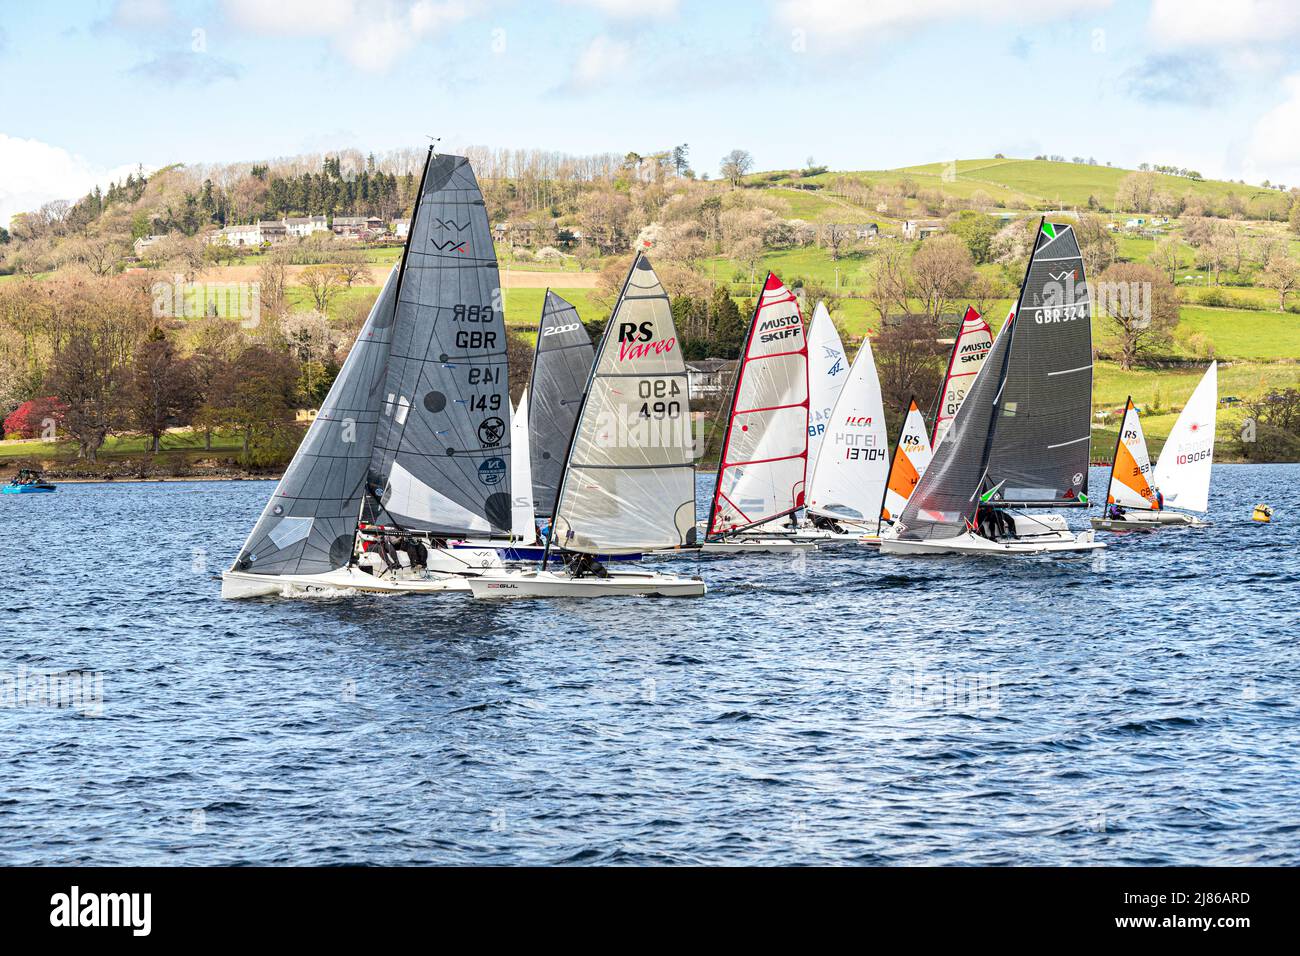 The start of a dinghy race at Ullswater Yacht Club in the English Lake District, Cumbria, England UK Stock Photo